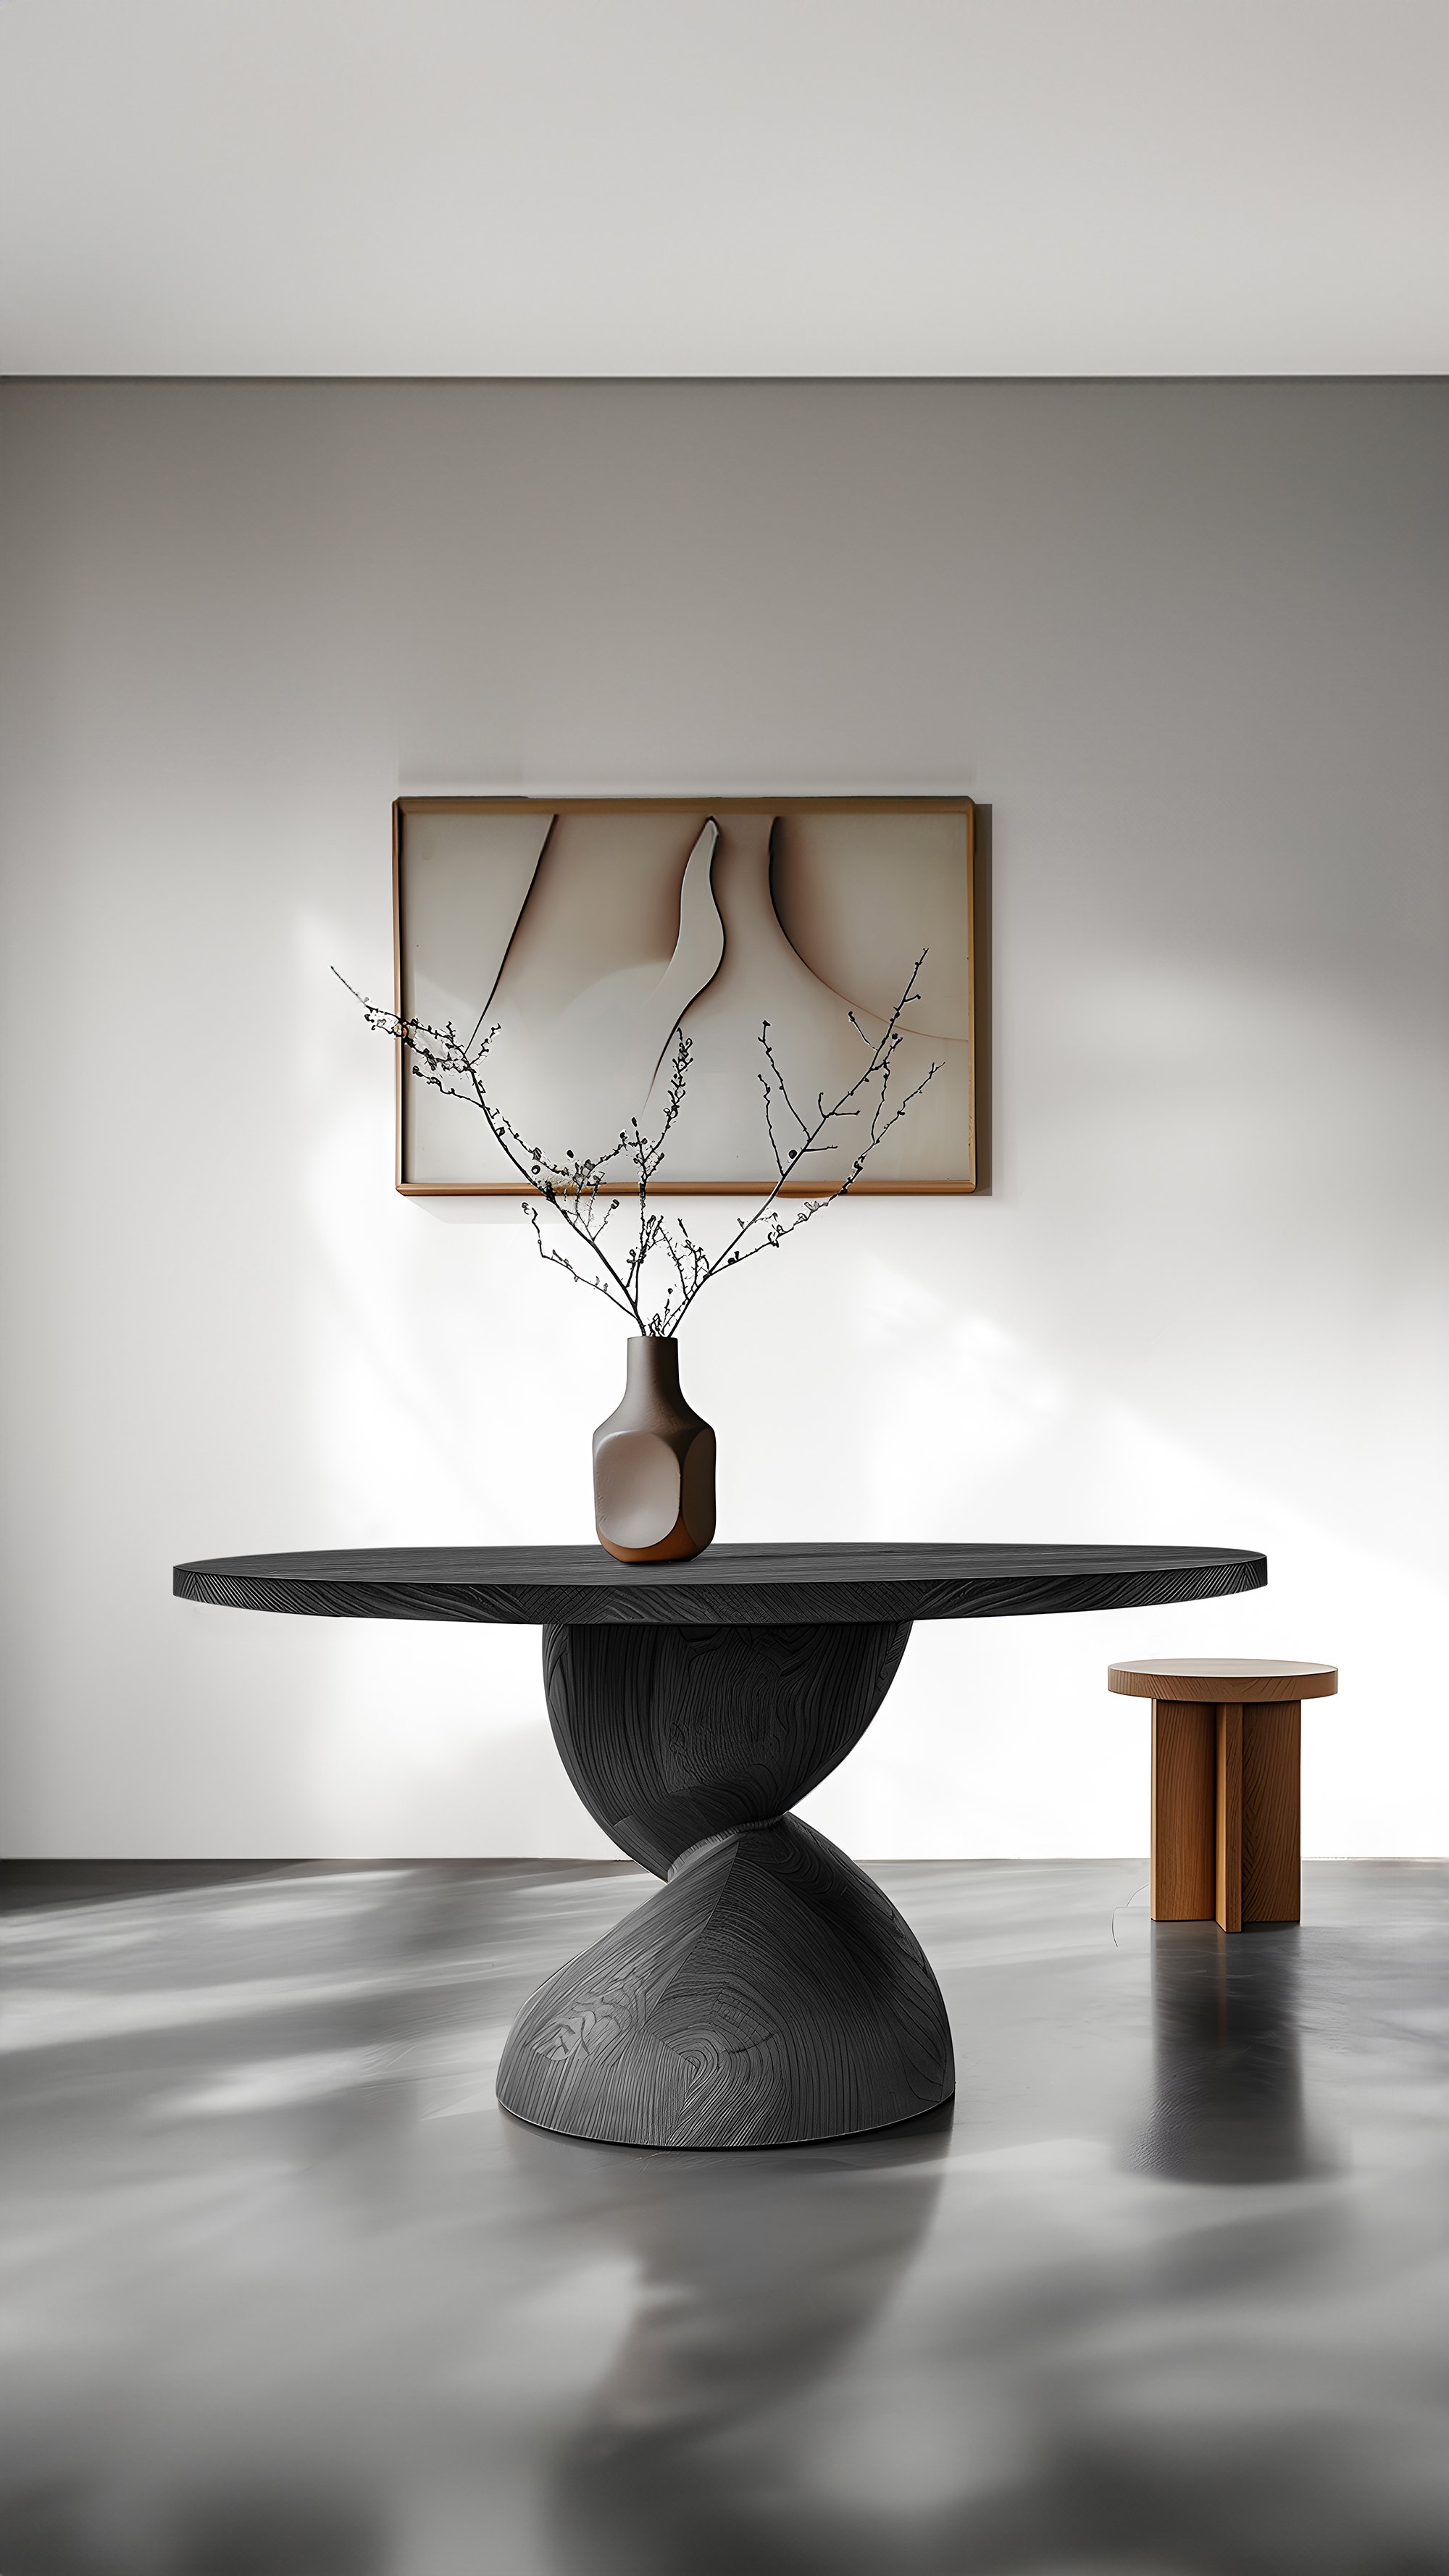 Dining Tables, Socle in Black Solid Wood No18, Mealtime Masterpieces by NONO - 7.jpg